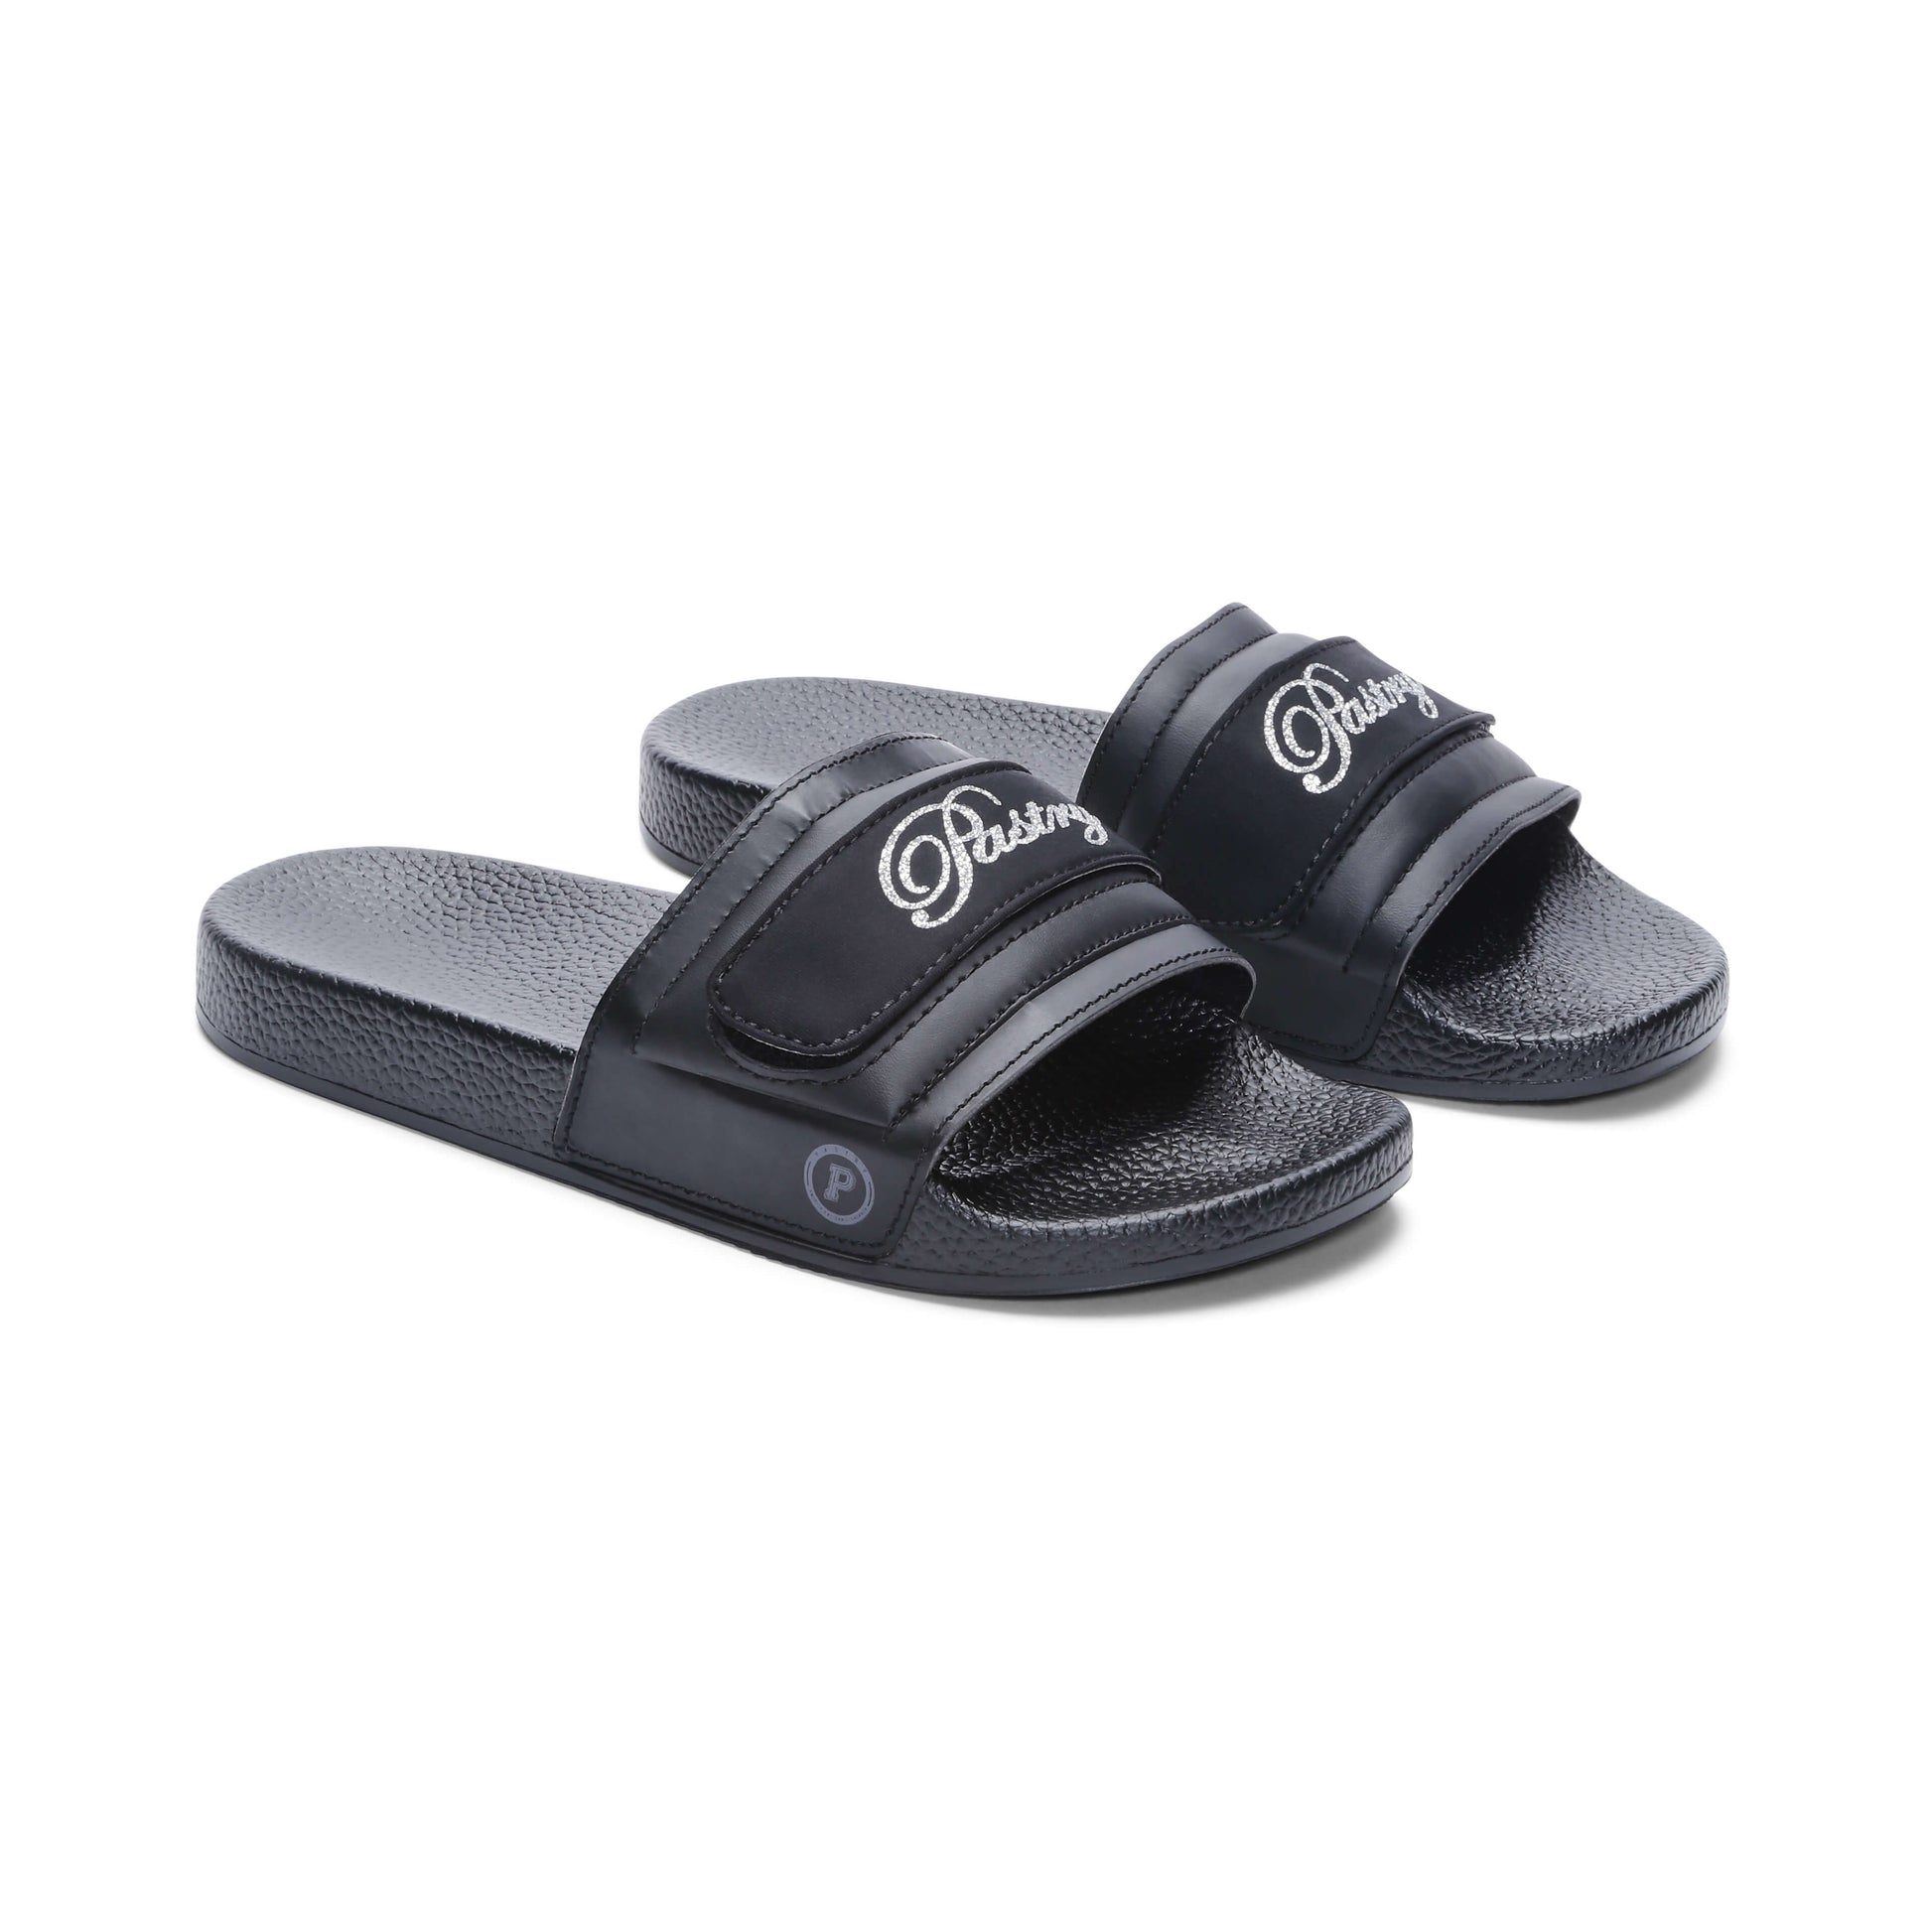 Pair of Pastry Adult Women's Recovery Slide Customized with Pastry Logo Straps in 3 Quarter view